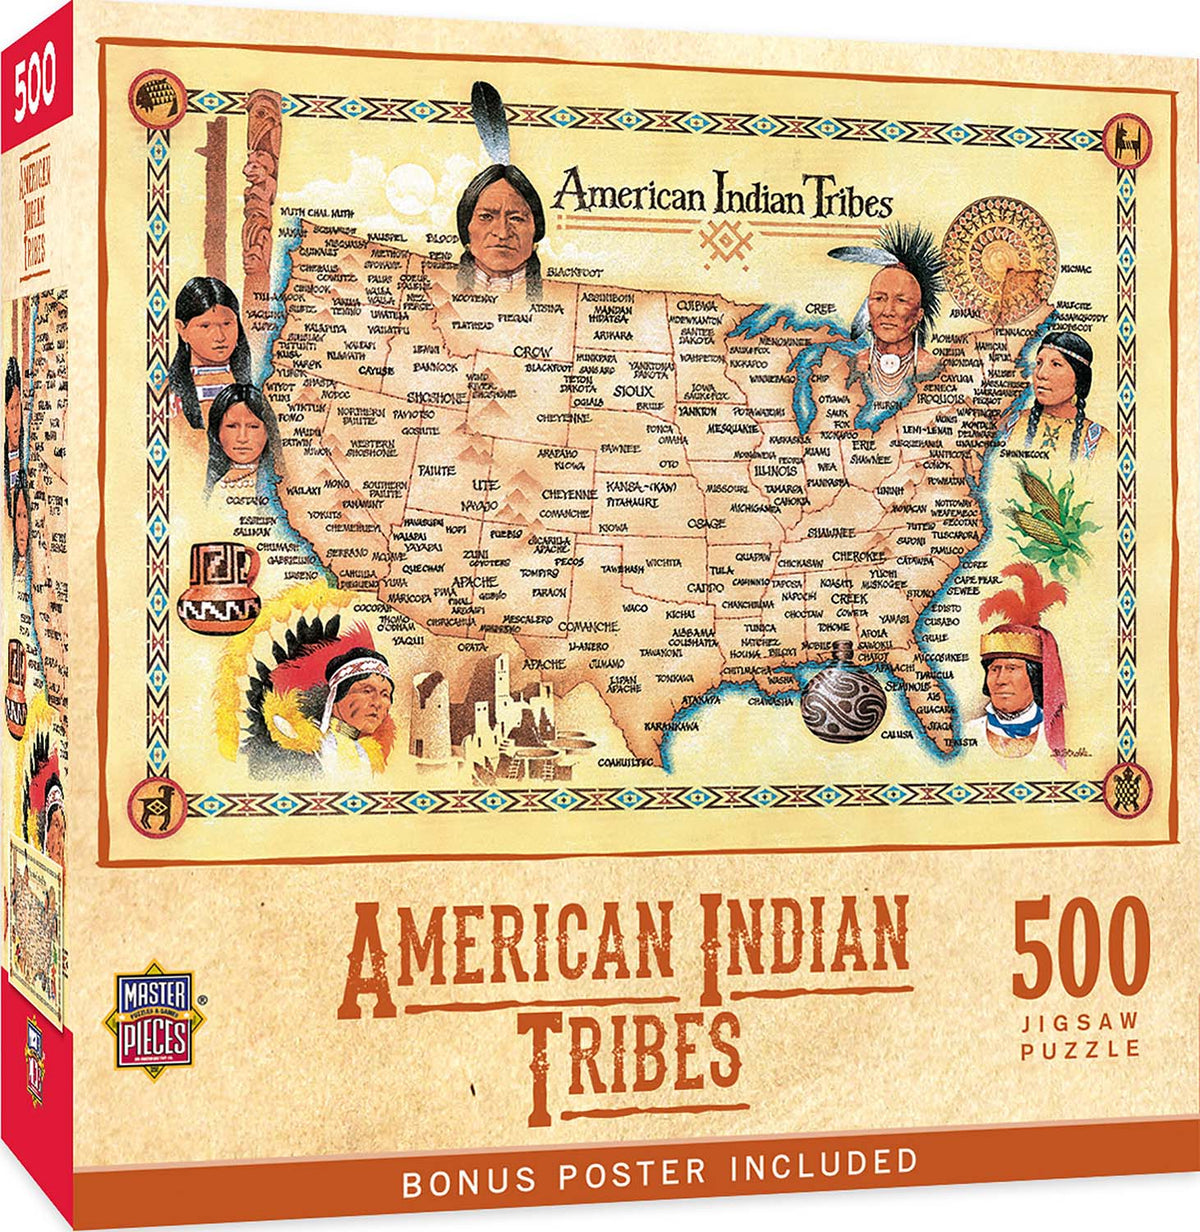 American Indian Tribes 550 Piece Puzzle